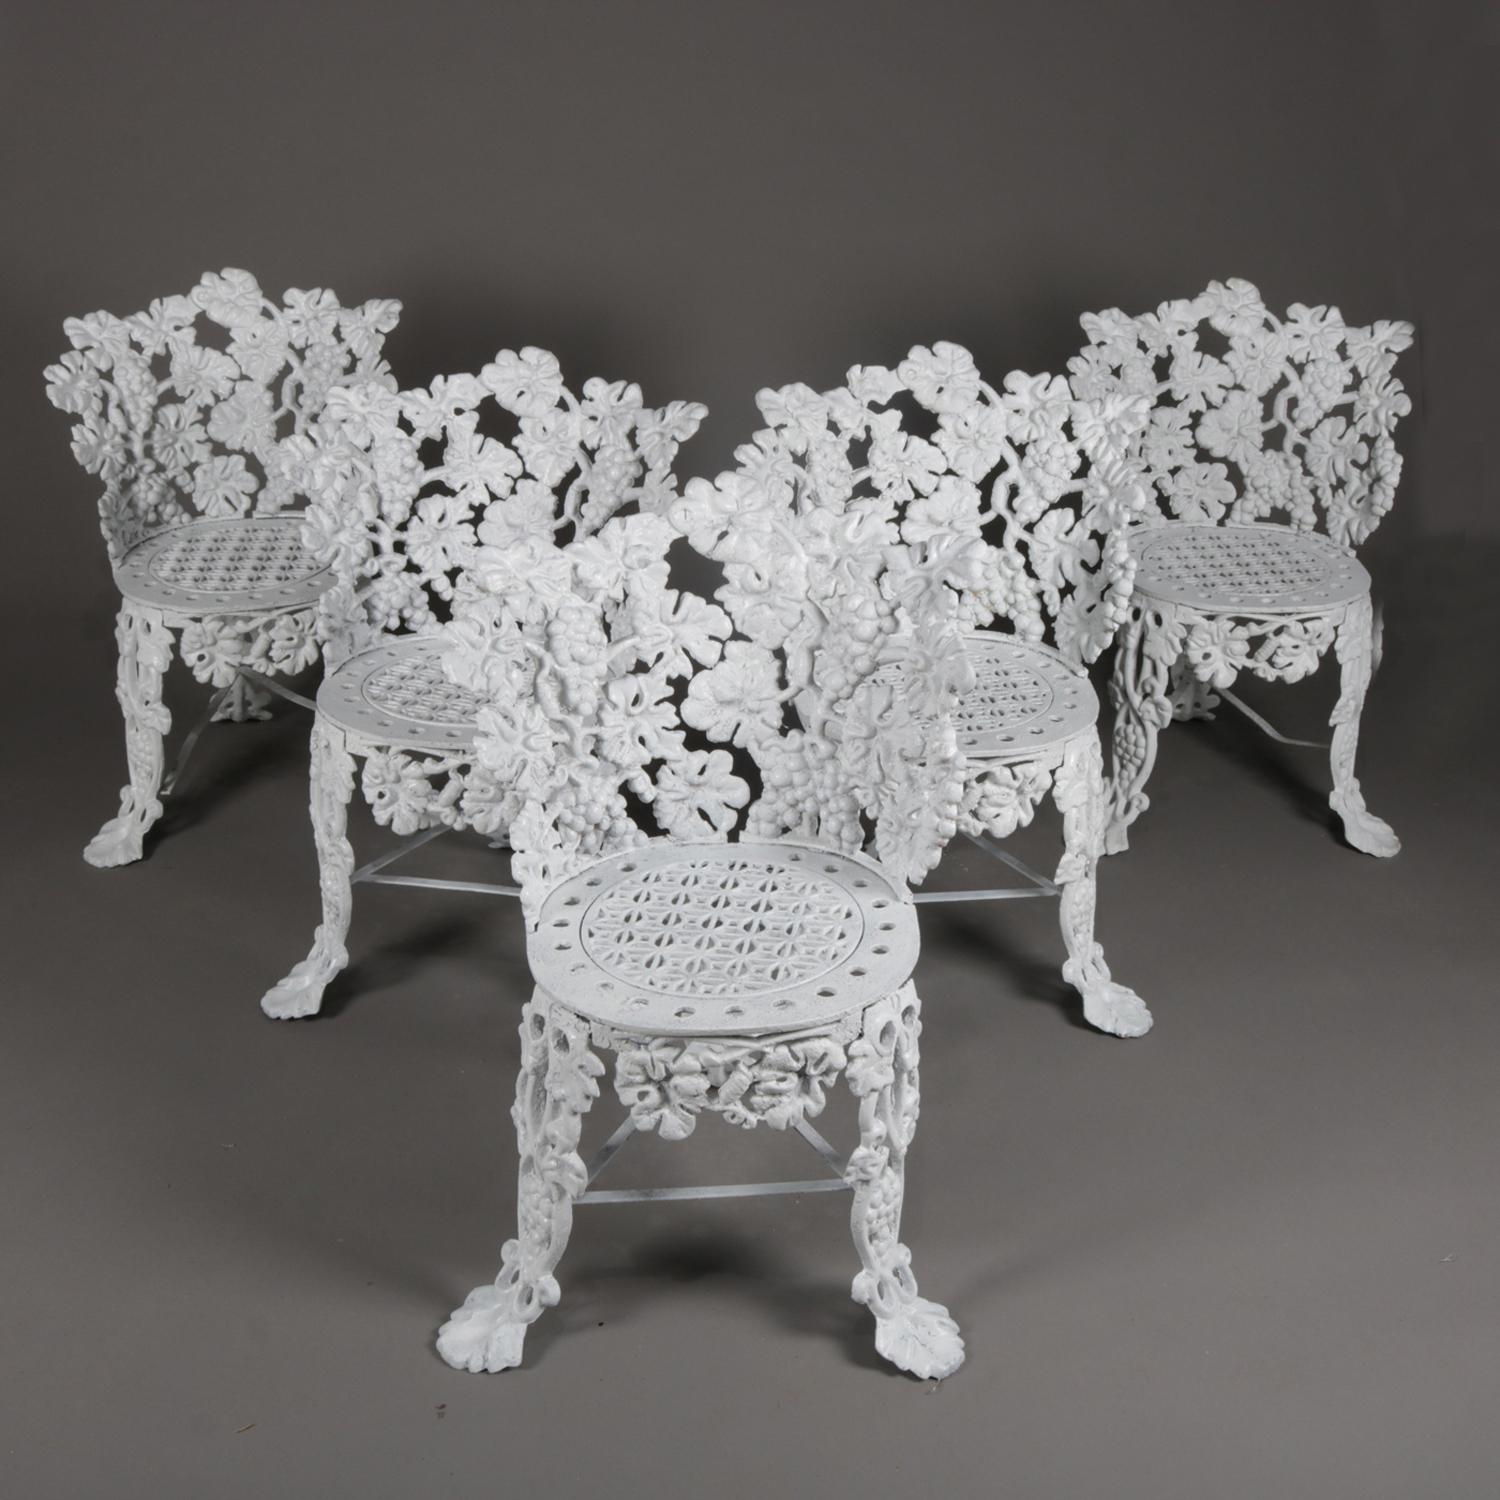 Set of 5 Victorian reticulated garden chairs features cast iron construction in grape and leaf pattern and seated on cabriole legs terminating in stylized paw feet and painted white, 20th century

Measures: 29